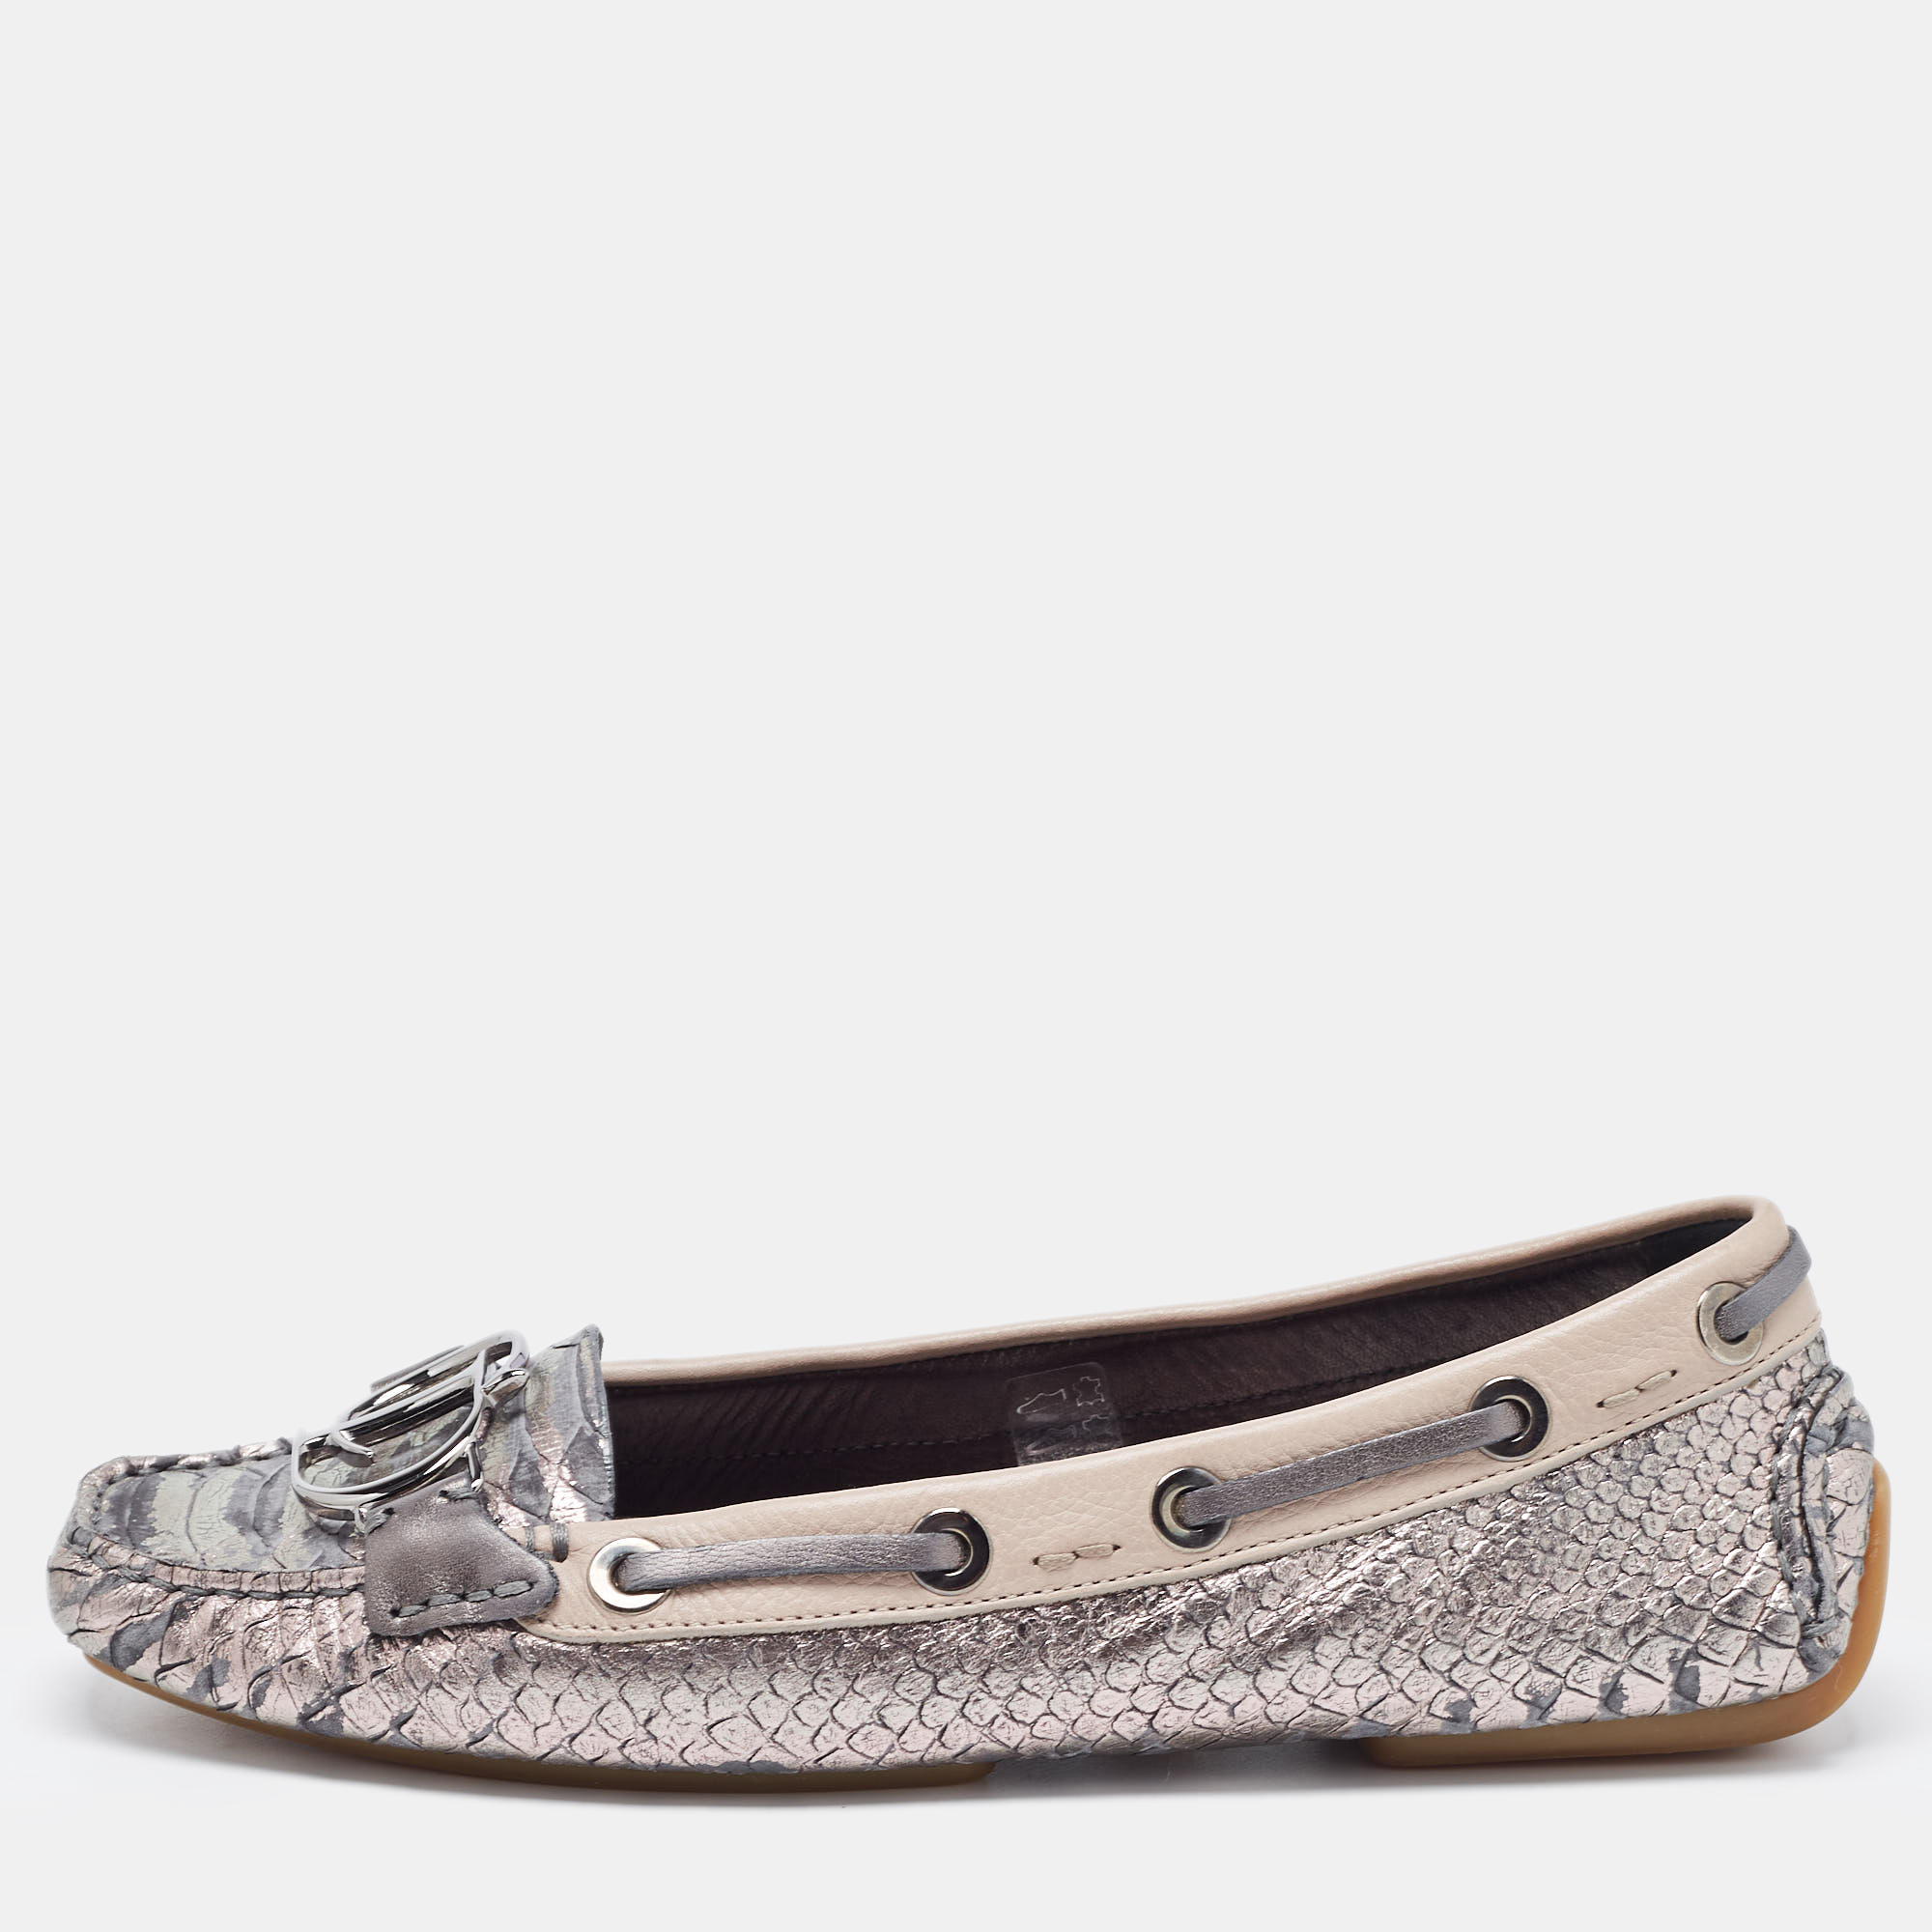 Dior Metallic Grey/Pink Python Embossed Leather CD Slip Loafers 38.5